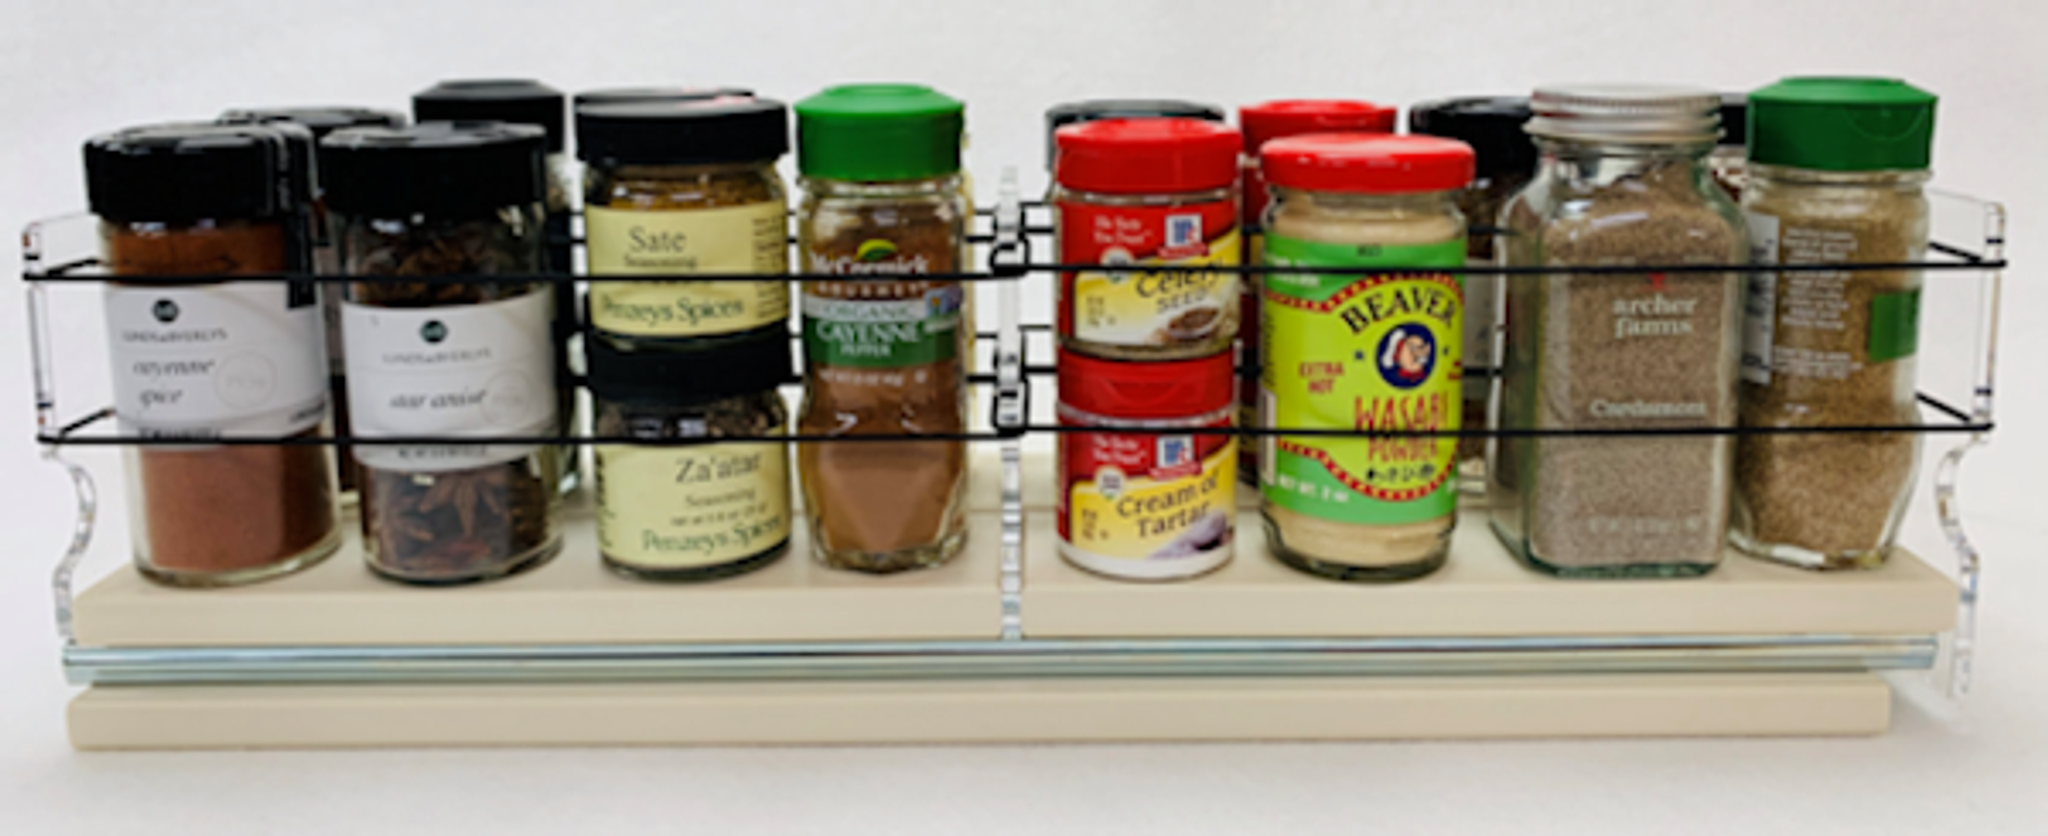 Spice Rack 18 spices